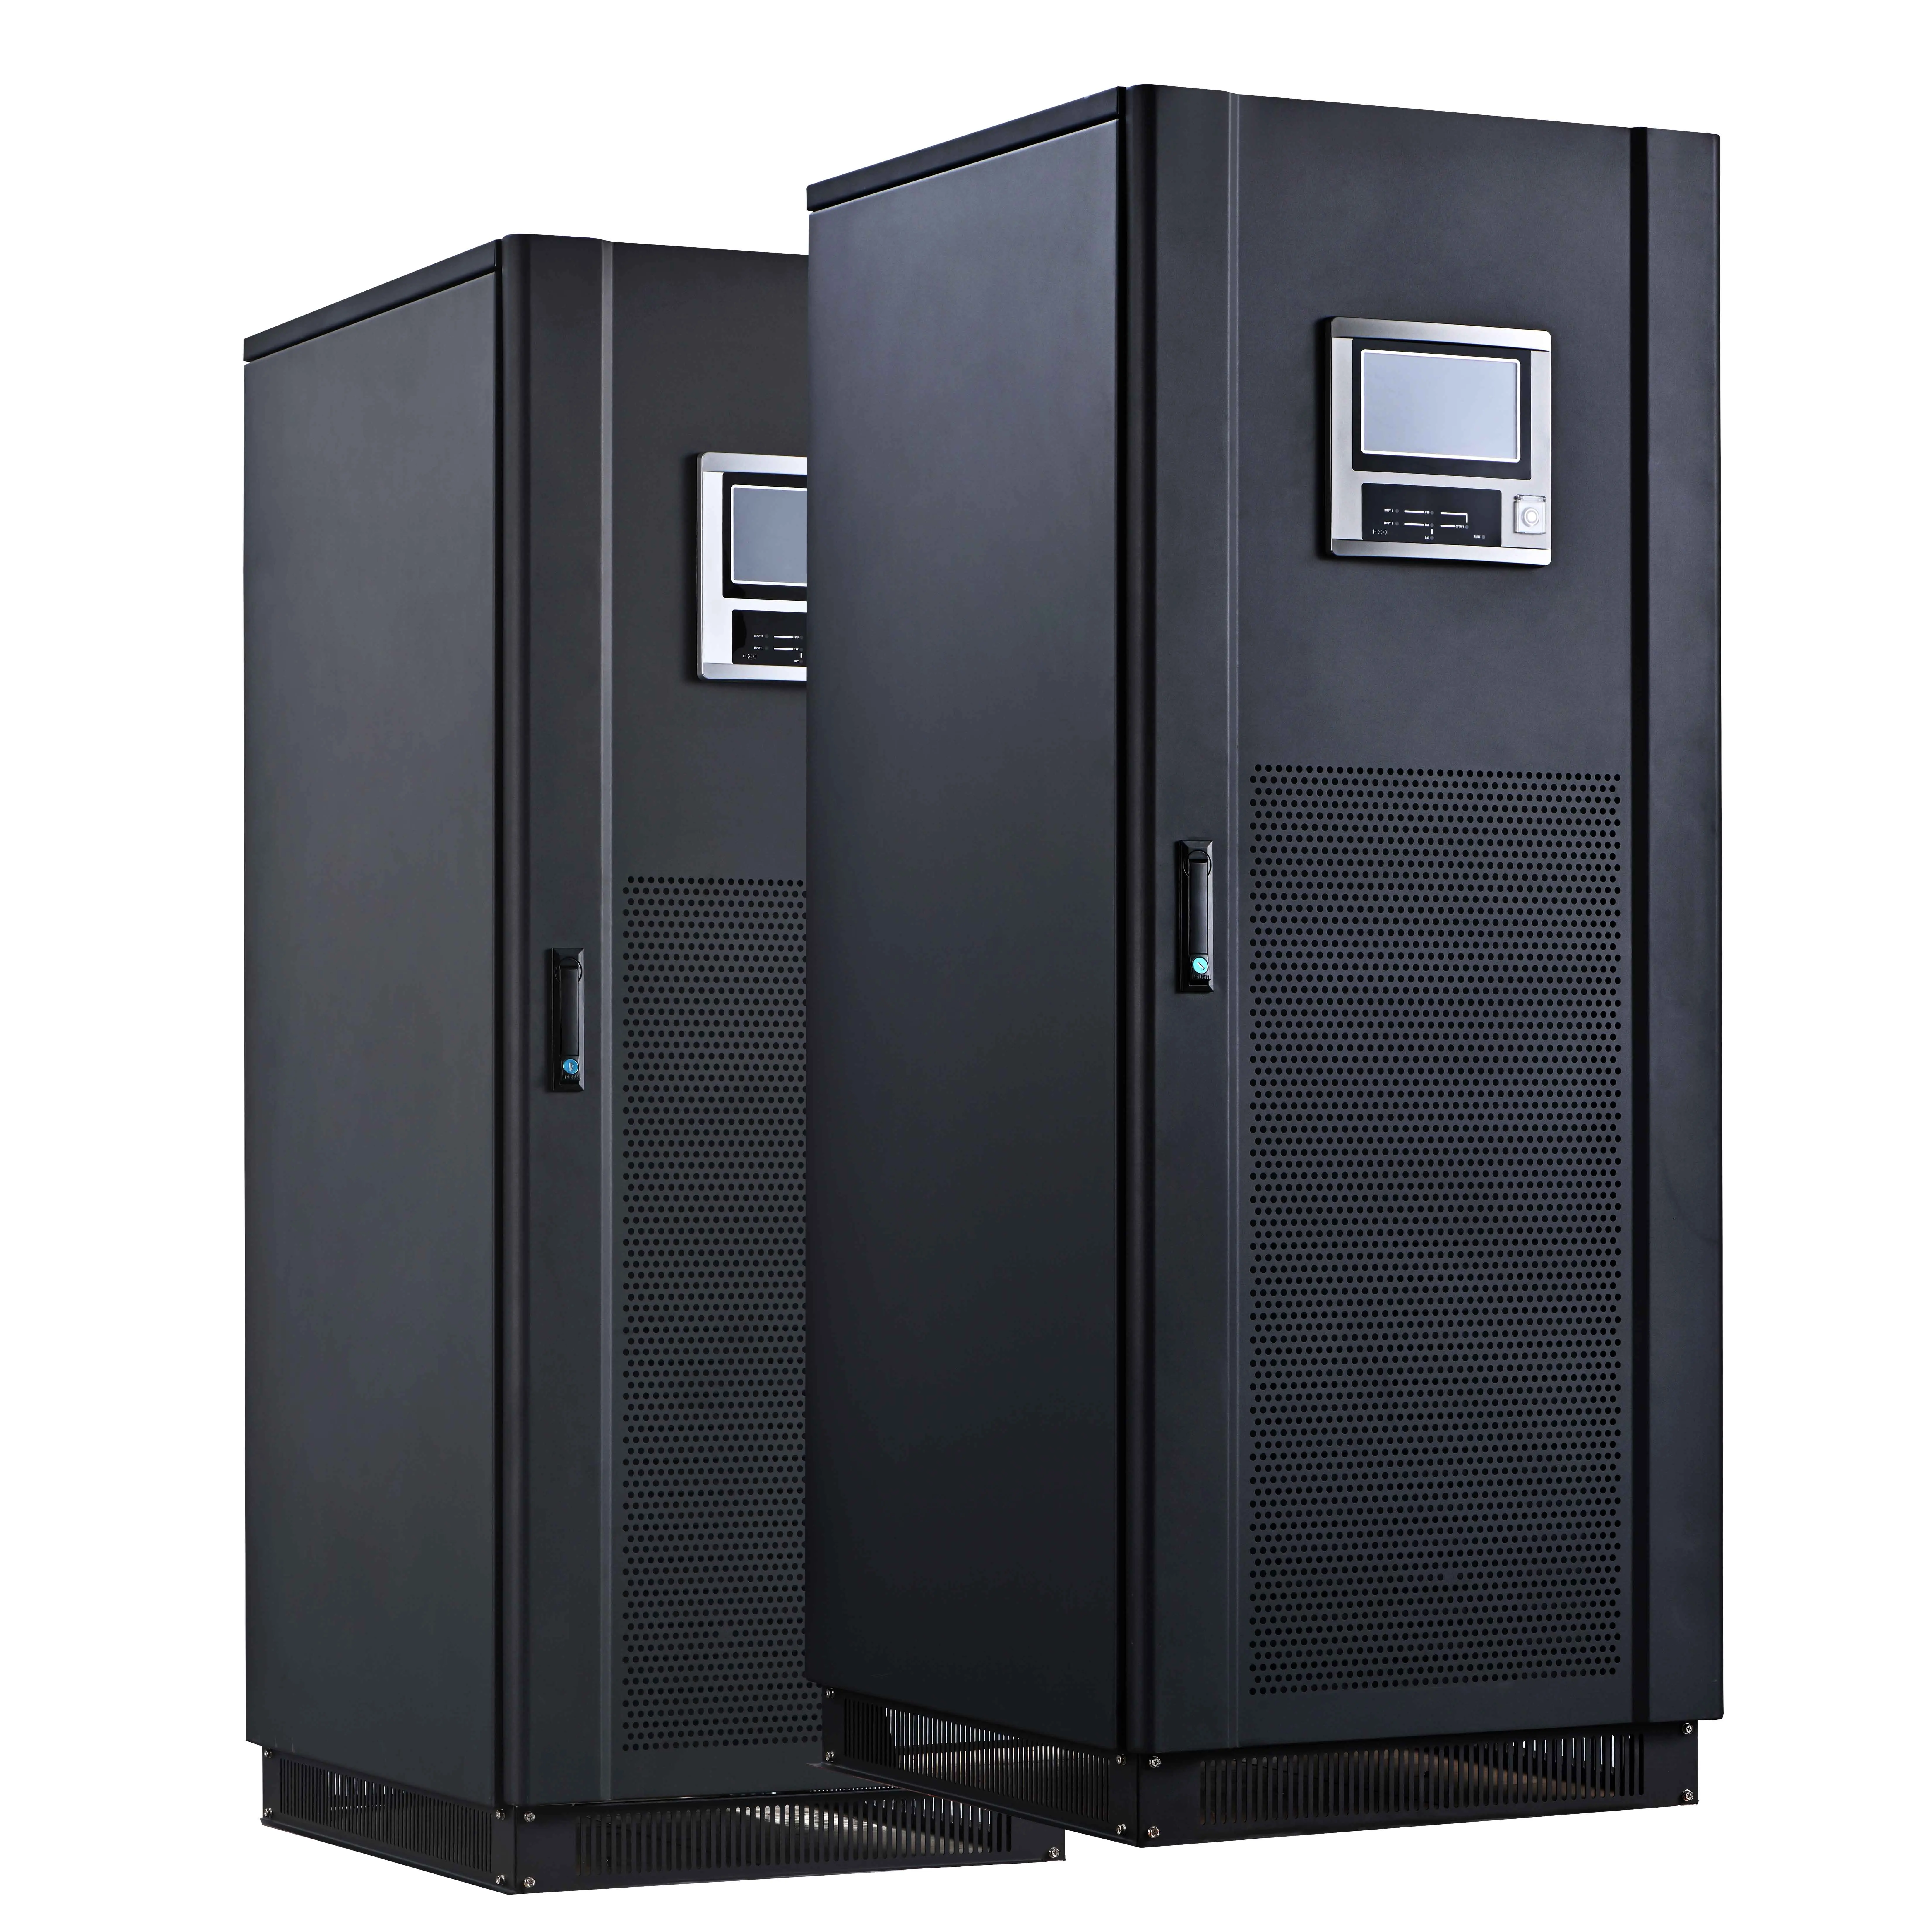 Shenzhen Low frequency Industrial ups 40kva 60kva 80kva 100KVA 120kva 160kva 200kva 300kva UPS Price